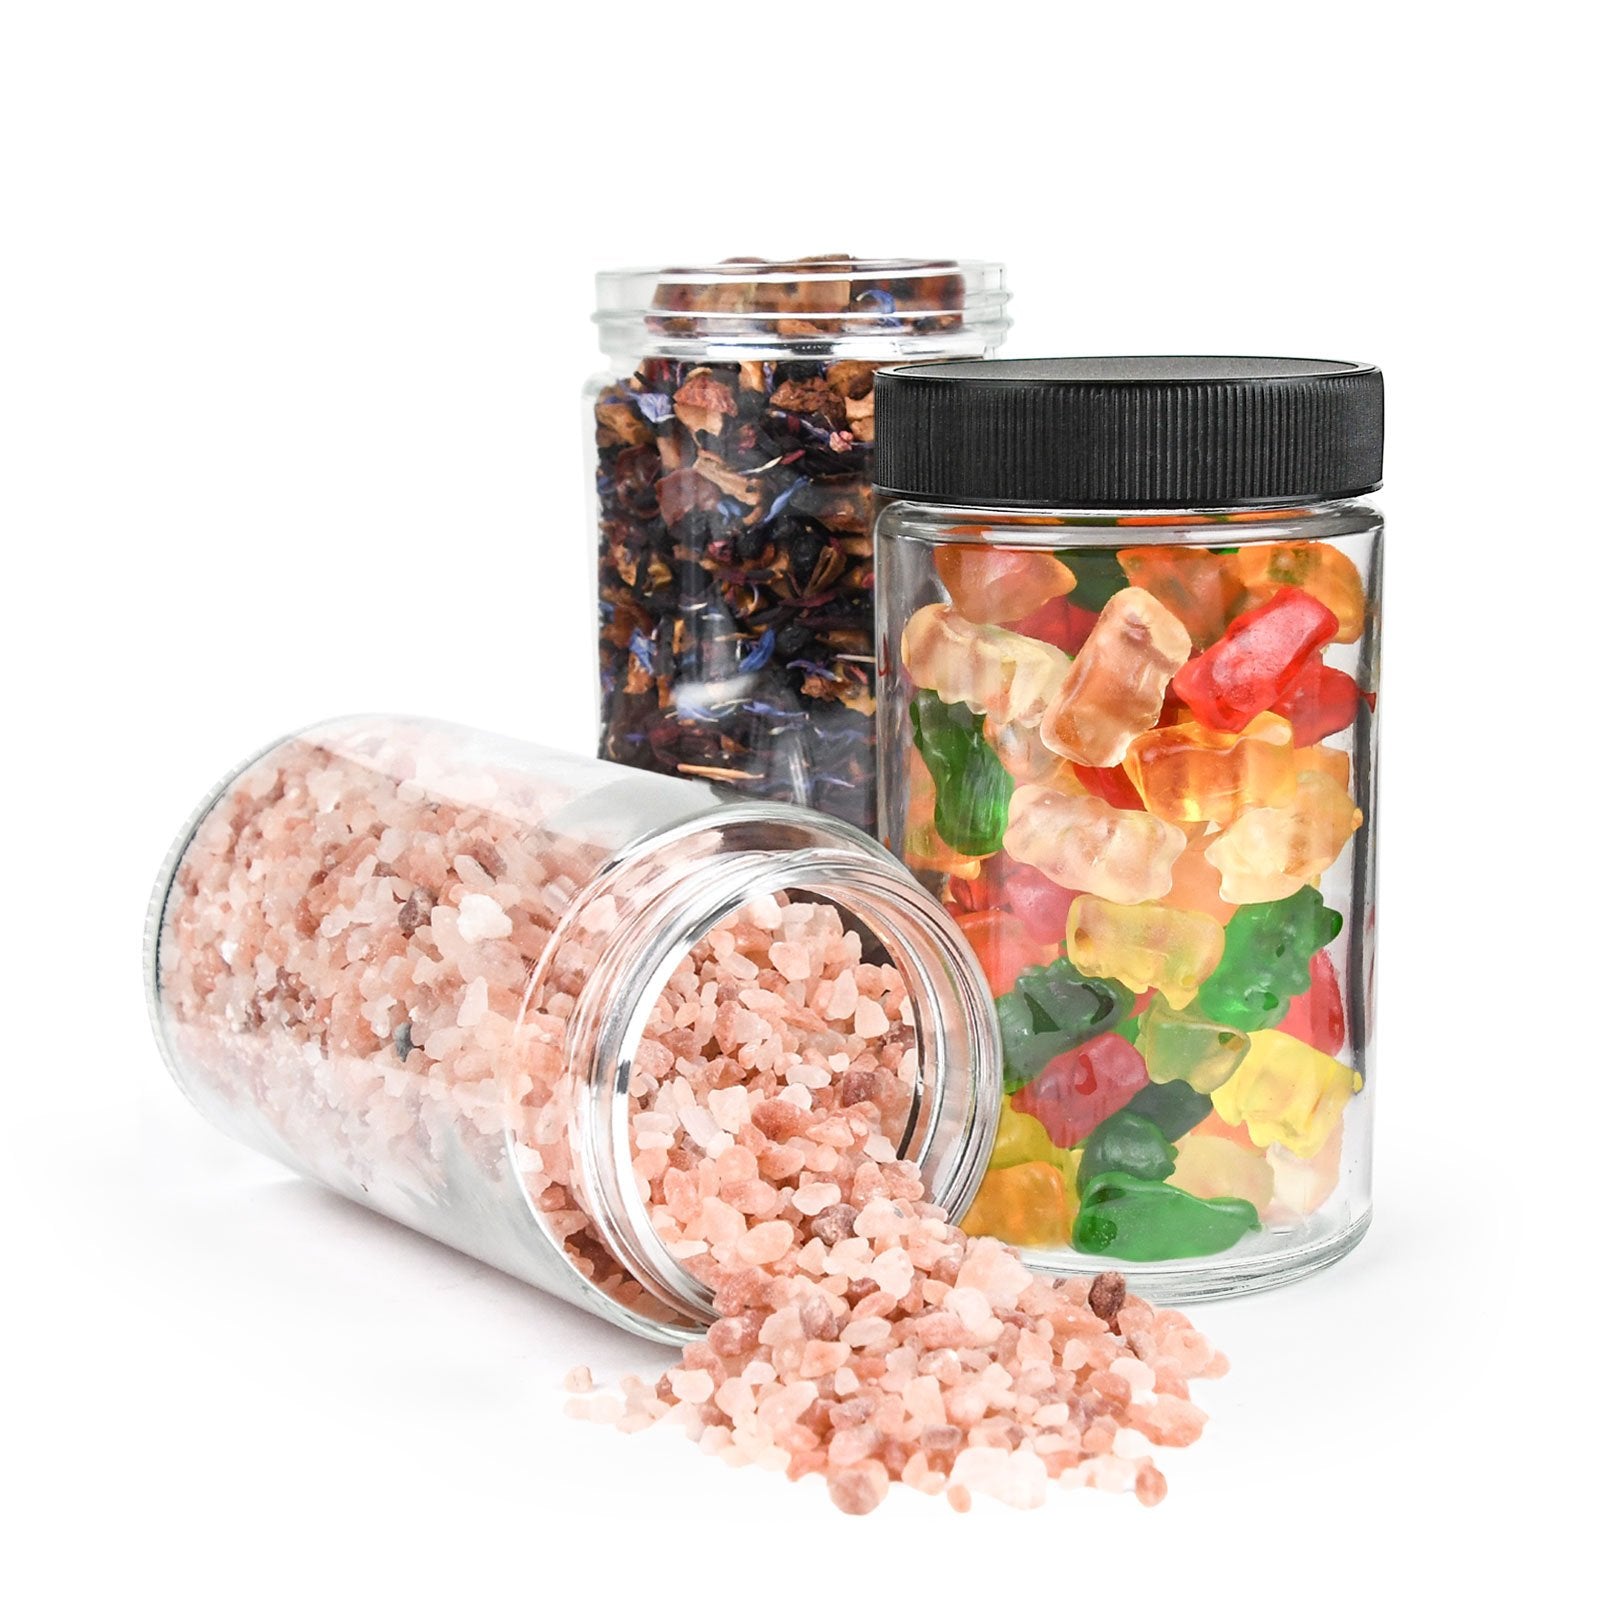 18oz Glass Jars With Black Caps - 28 Grams - 1 Count